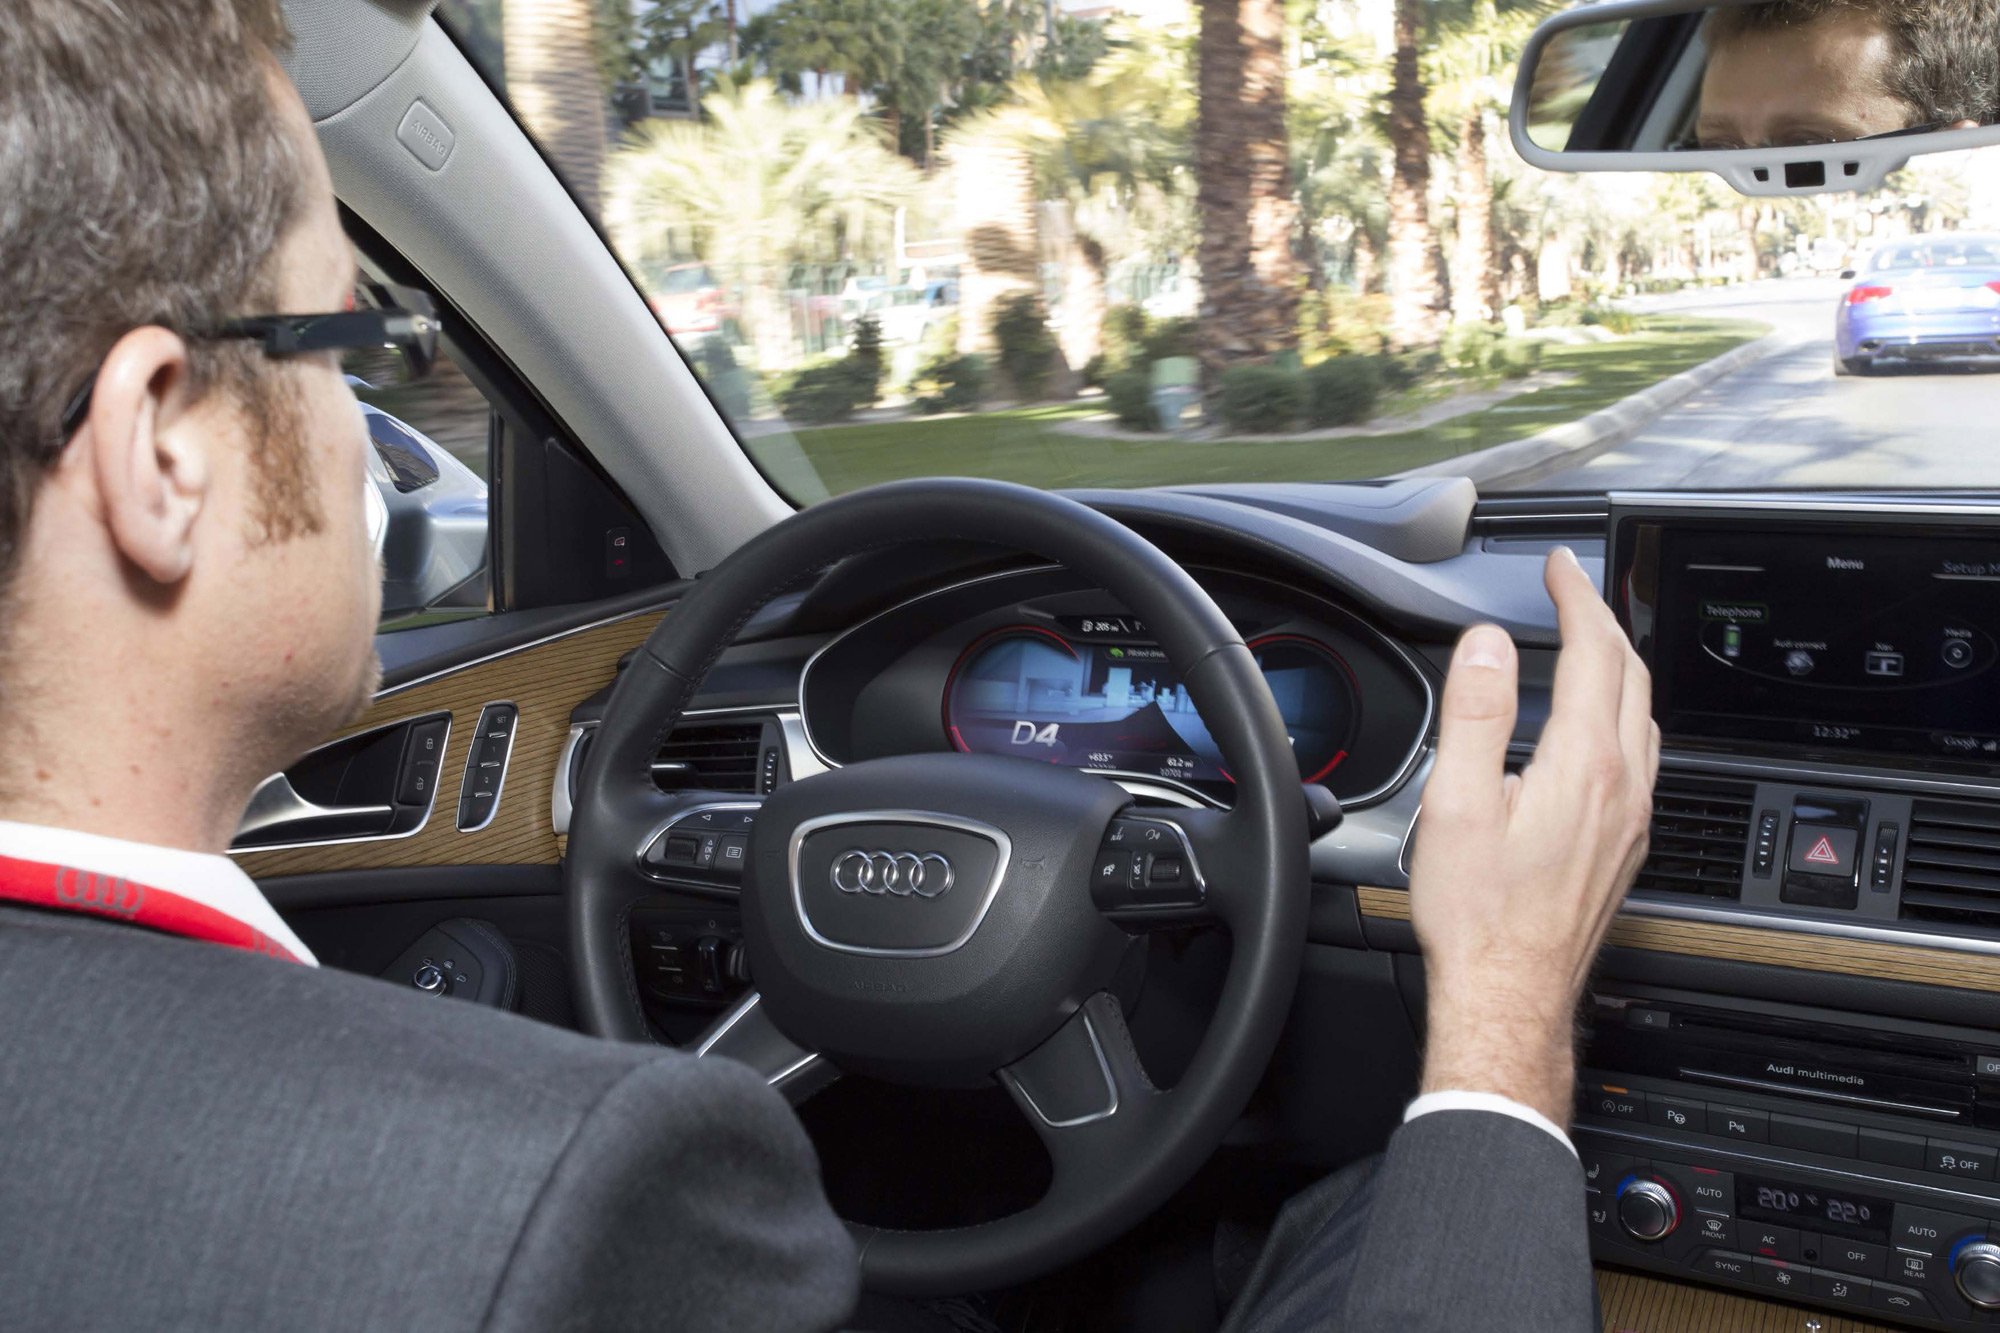 audi piloted driving hands-off